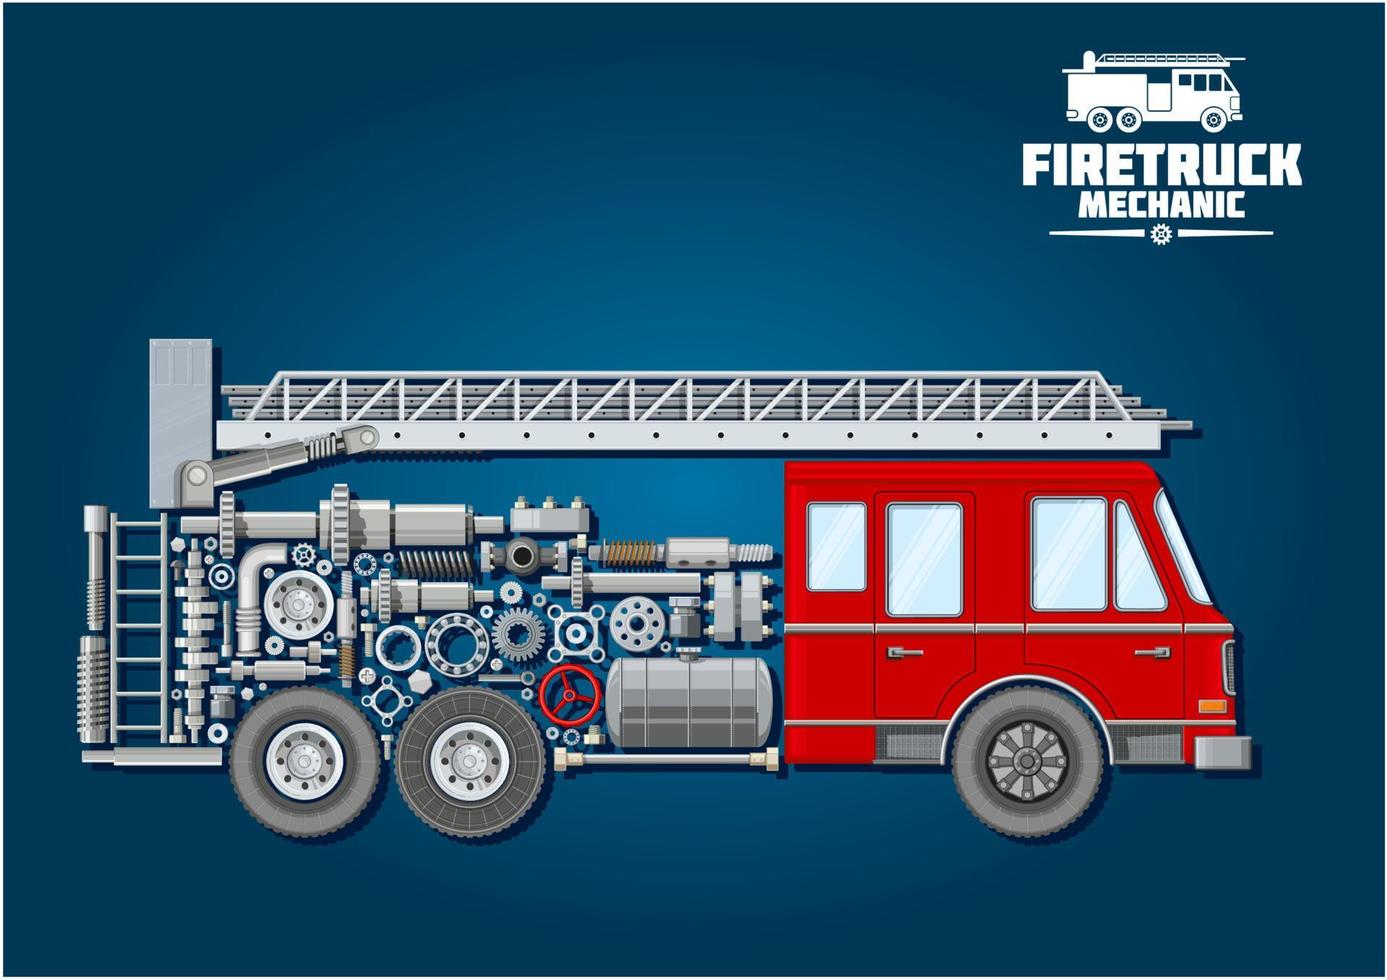 Fire truck icon with mechanical details vector